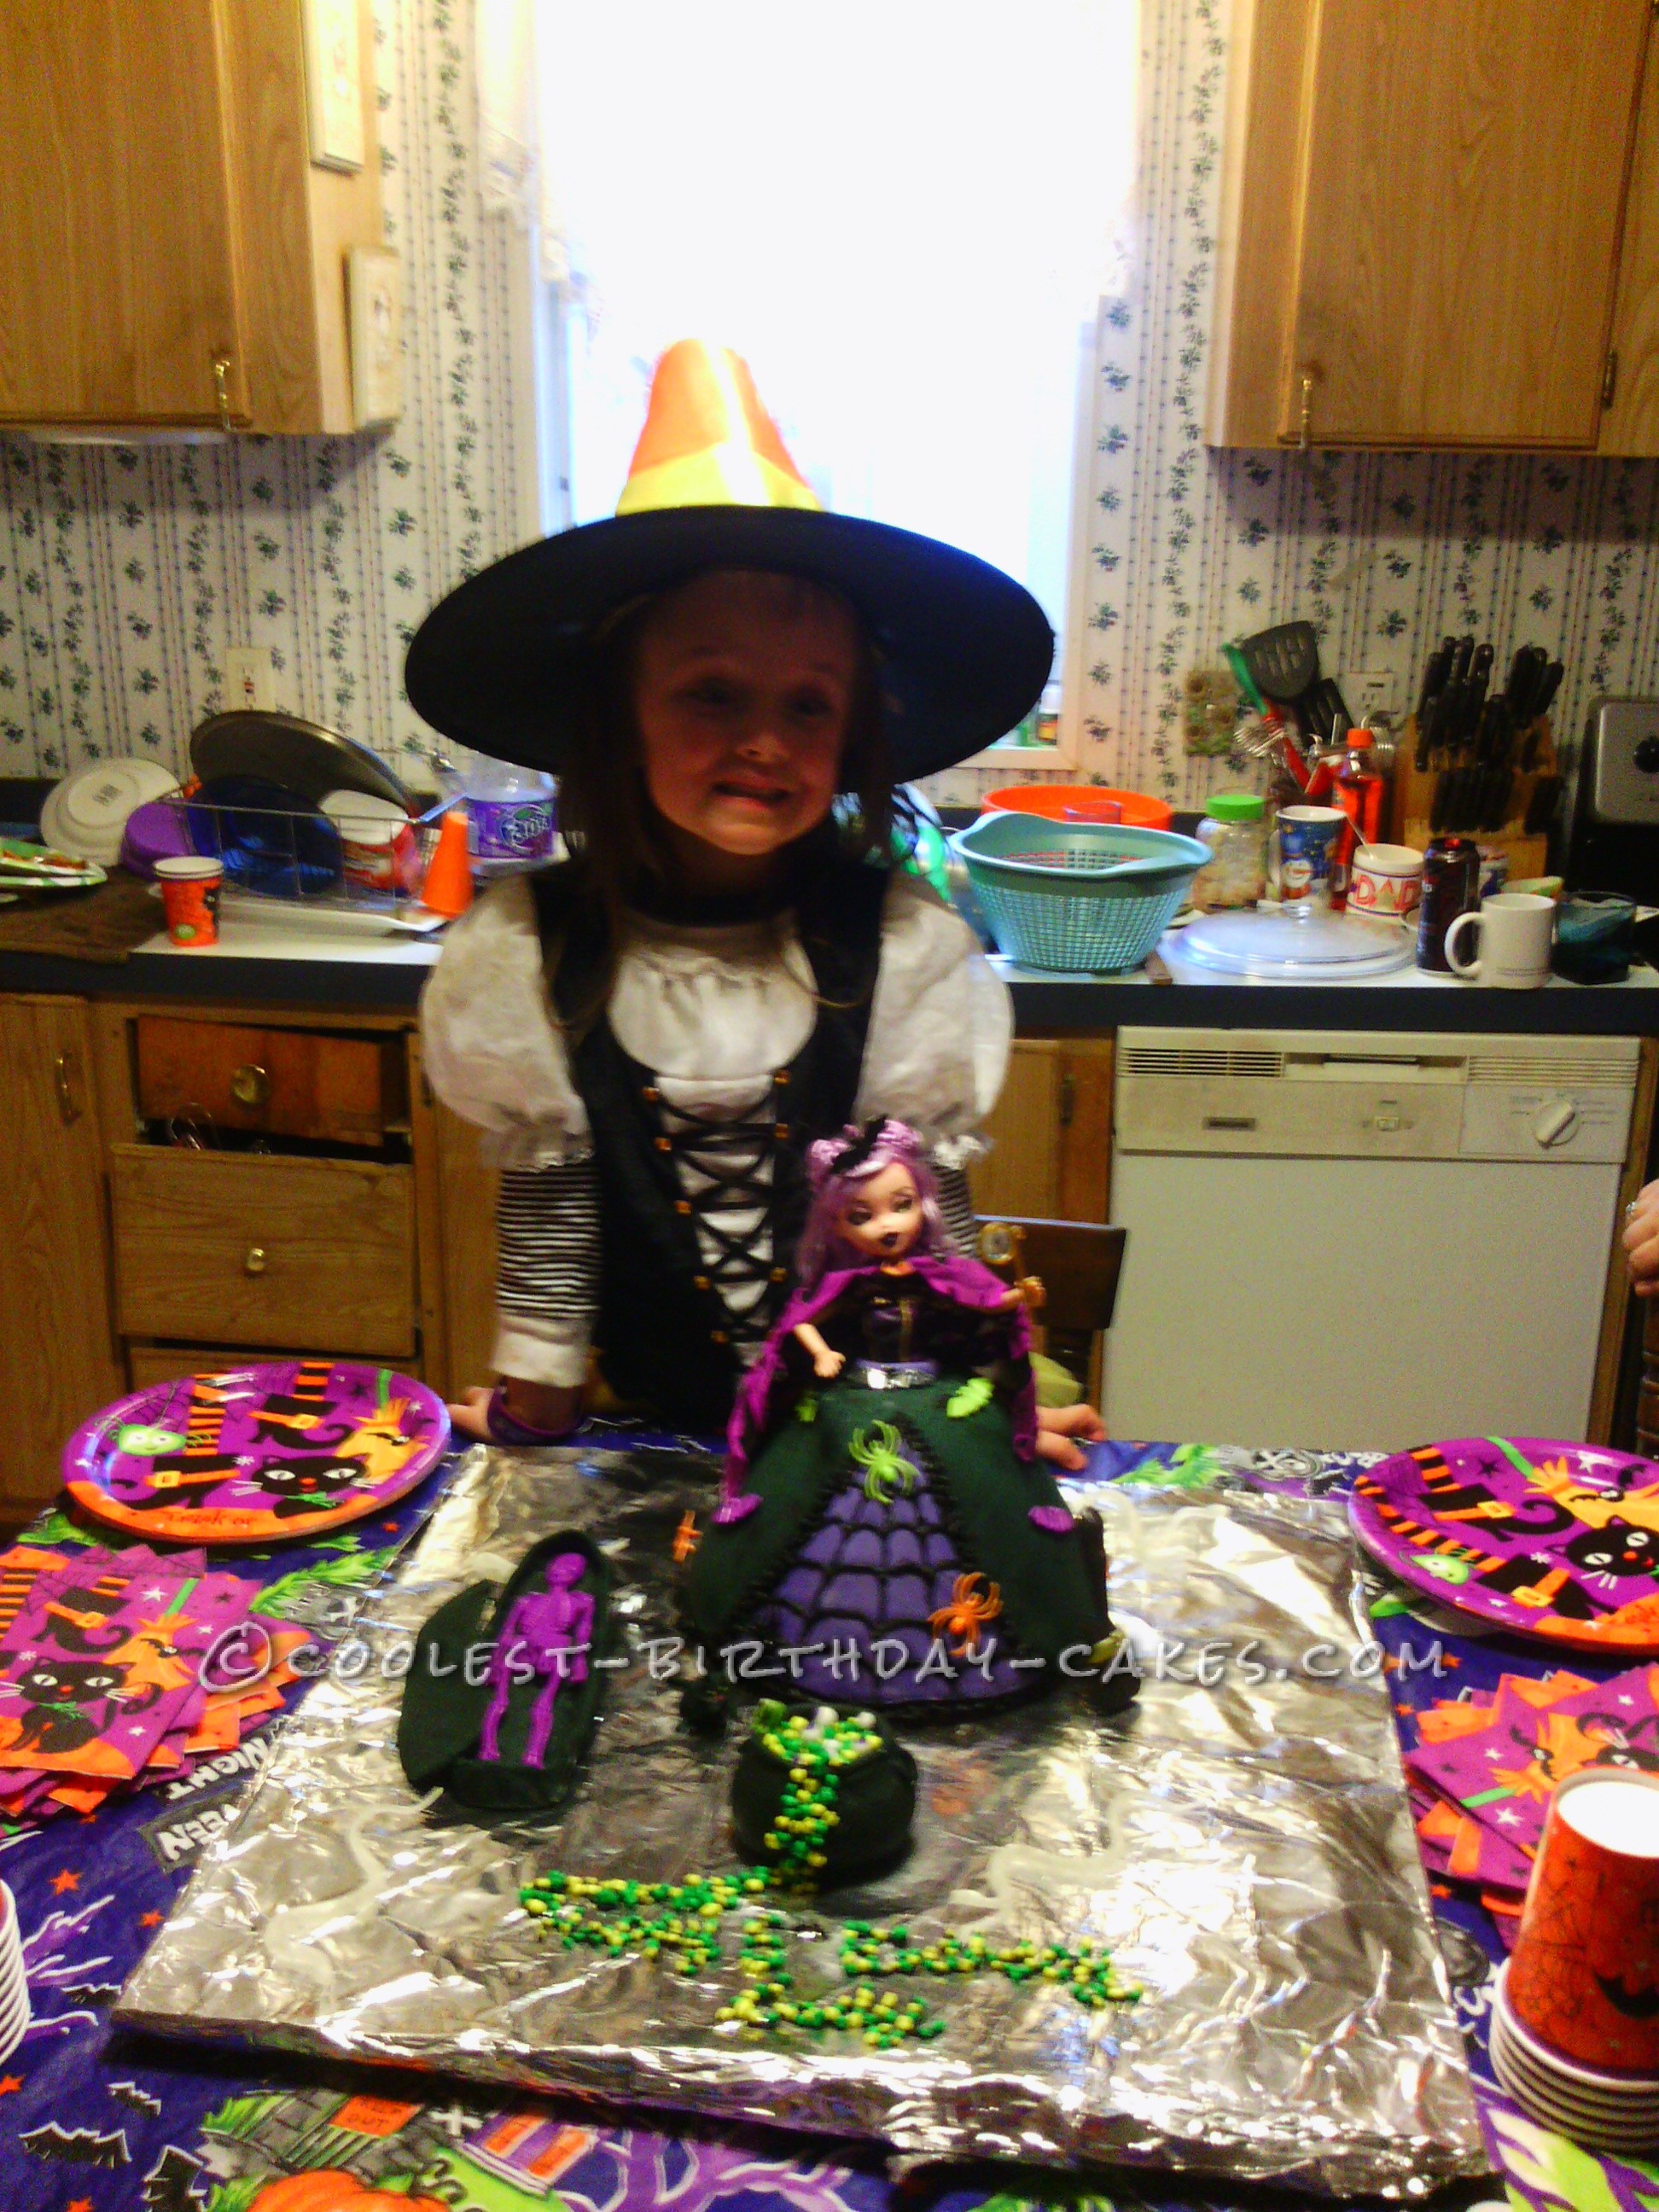 Cutest Witch Doll Cake for a Halloween Birthday